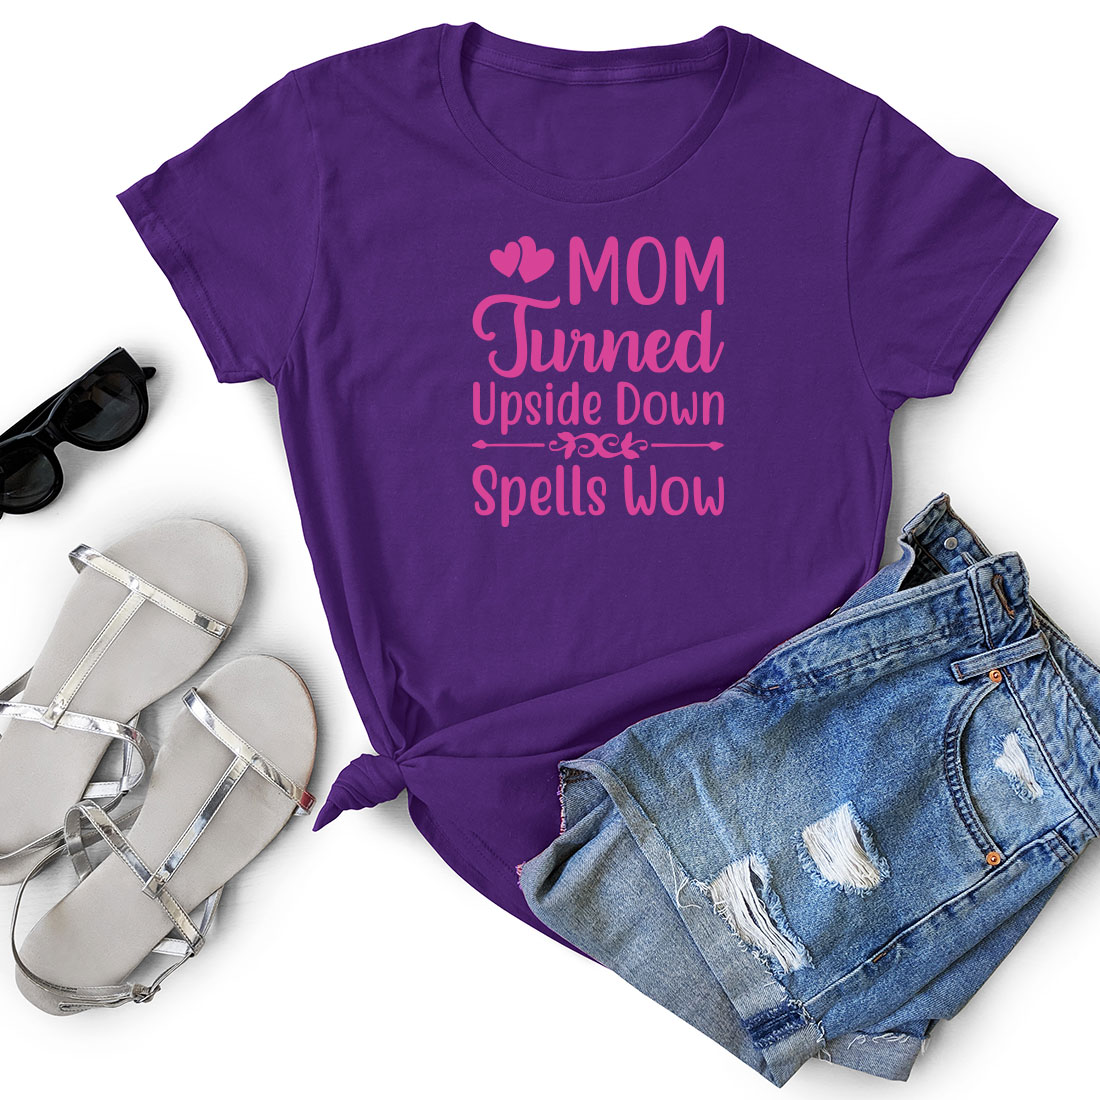 T - shirt that says mom turned upside down spell's wow.